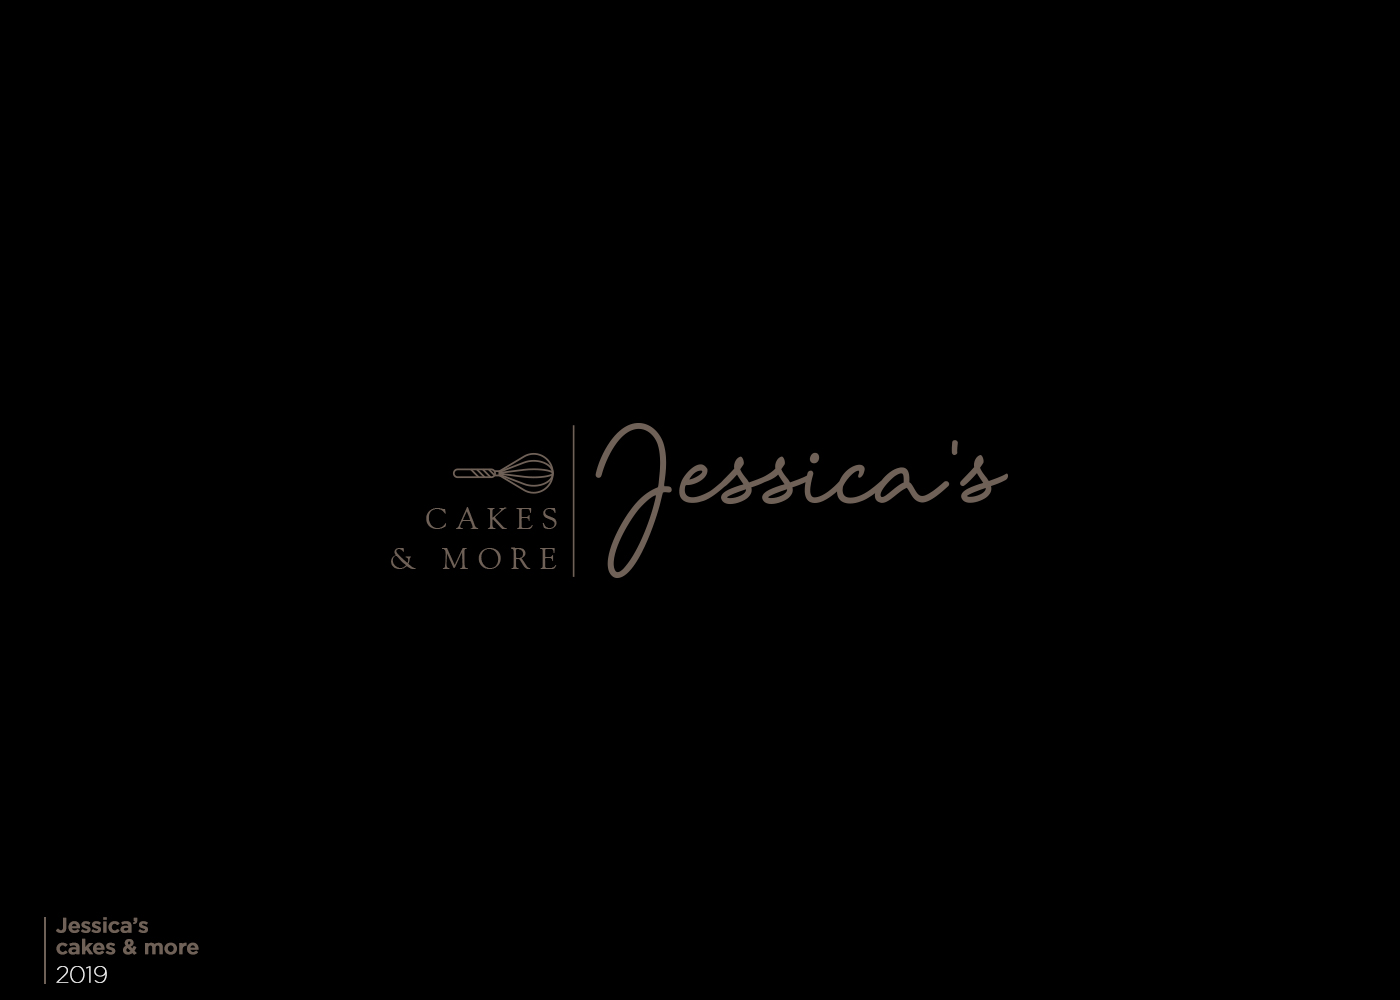 Jessica's cakes and more logo